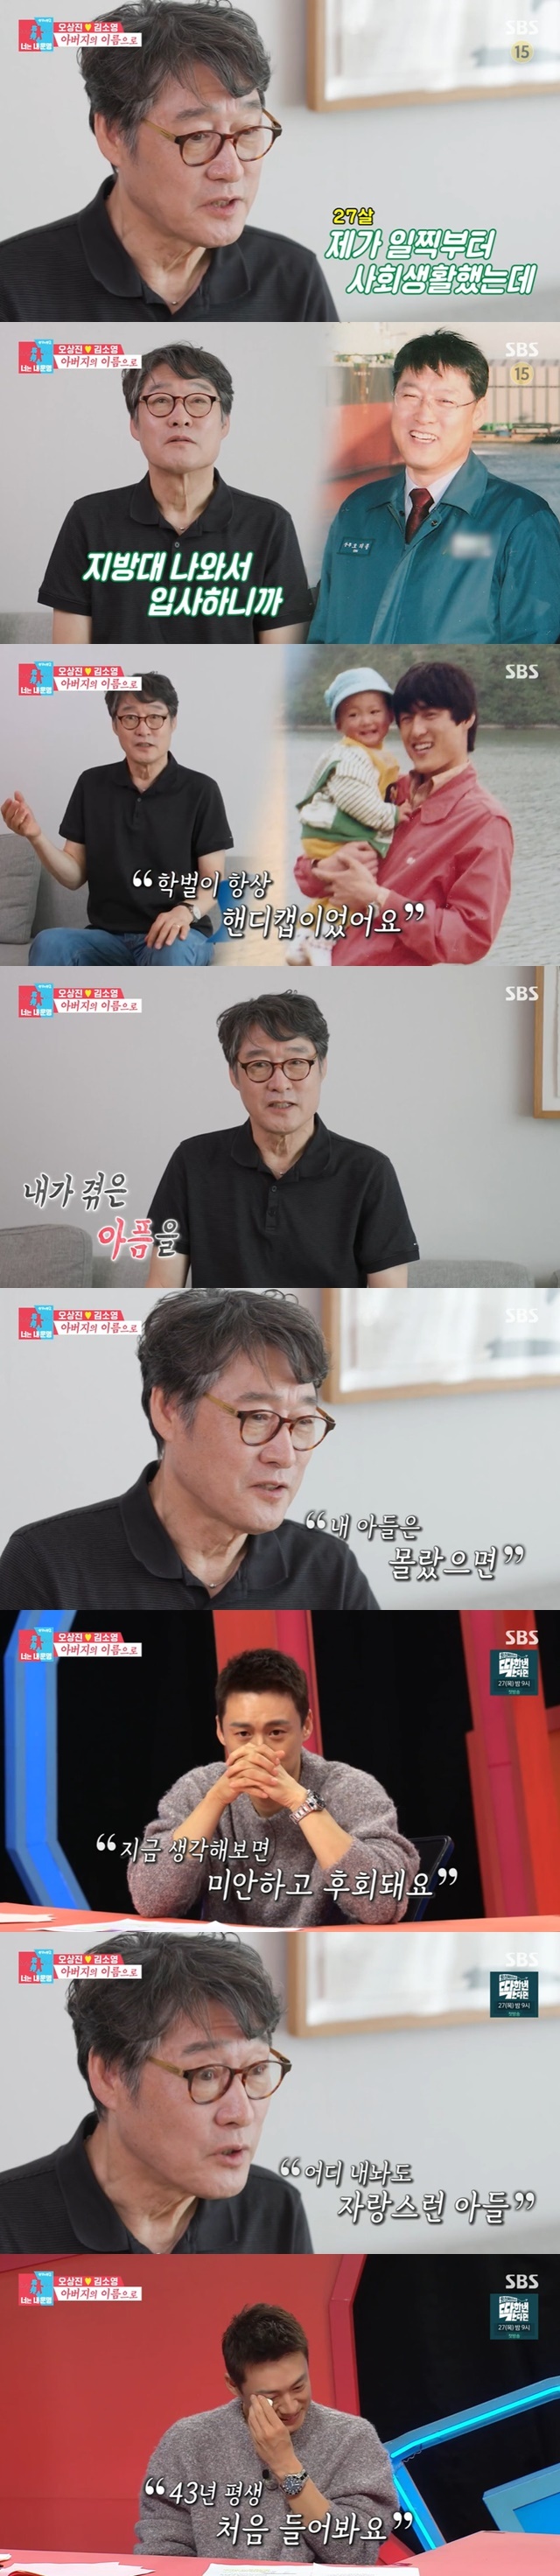 Oh Sang-jin Father rang the son by telling the sincerity that raised the son strictly.SBS  ⁇  Same Bed, Different Dreams 2 Season 2 - You are my destiny Oh Sang-jin invited his parents to celebrate his daughter SuAs birthday.Previously, Oh Sang-jin Kim So-young and his wife, MBC Announcer couple from Yonsei University, read Hangul and began to speak English, revealing their 4-year-old daughter SuA and attracted attention with their unique intellectual DNA.Oh Sang-jin, who is famous for his mother-in-law, said that he had played 20th in the nation.On the same day, Kim Il-joong Announcer, who was interviewed at Oh Sang-jin and SBS Announcer final interview, appeared as a special MC and SBS president at the time of Announcer test. After he passed the test, Oh Sang-jin went straight to the MBC Announcer test as a passing star.Subsequently, through the VCR, Oh Sang-jins parents, who are famous for their mother-in-law and son-in-law, were revealed and robbed their eyes.Oh Sang-jin invited her parents to celebrate her daughter SuAs birthday and cooked beef Wellington, and Kim So-young made a cake and demonstrated her ability to break up.However, Oh Sang-jin rarely reacted to Kim So-youngs cake and excused that his tendency resembled his father.Oh Sang-jins father was Oh Eui-jong, a former managing director of H Heavy Industries, and his mother was Jin Soo-yeon, a textile art major at Ewha Womans University, boasting superior specs, and Oh Sang-jin has the highest respect for his single father. There was antipathy in respect.If I run 100m in 15 seconds, why do not I run in 13 seconds? He asked me, How many times do you get to be in the first place in the class? I am a good and good person, but I was greedy.In response, Oh Sang-jin Father said, Son has made himself a strict and blunt killer image on the air, and you are wrong about the problem that you should not be wrong since you were young.I came home at 12 oclock in the third year of high school and played the game, he said. I was frustrated because I was playing the game.In addition to this, Oh Sang-jin Father started his career at the age of 27. I came out of the fat belt and joined the company, so it was a considerable handicap in some way.I am sorry to think that I was so greedy if I did a little better because I did not want to repeat the train again. When I think about it now, I regret it a lot, I confessed.Also, Oh Sang-jin Father is thinking, Is not it enough to boast about the son? It is a precious son that can not be scored.Son is better than my father, where else can my parents be happy? I was proud to be able to talk proudly anywhere.